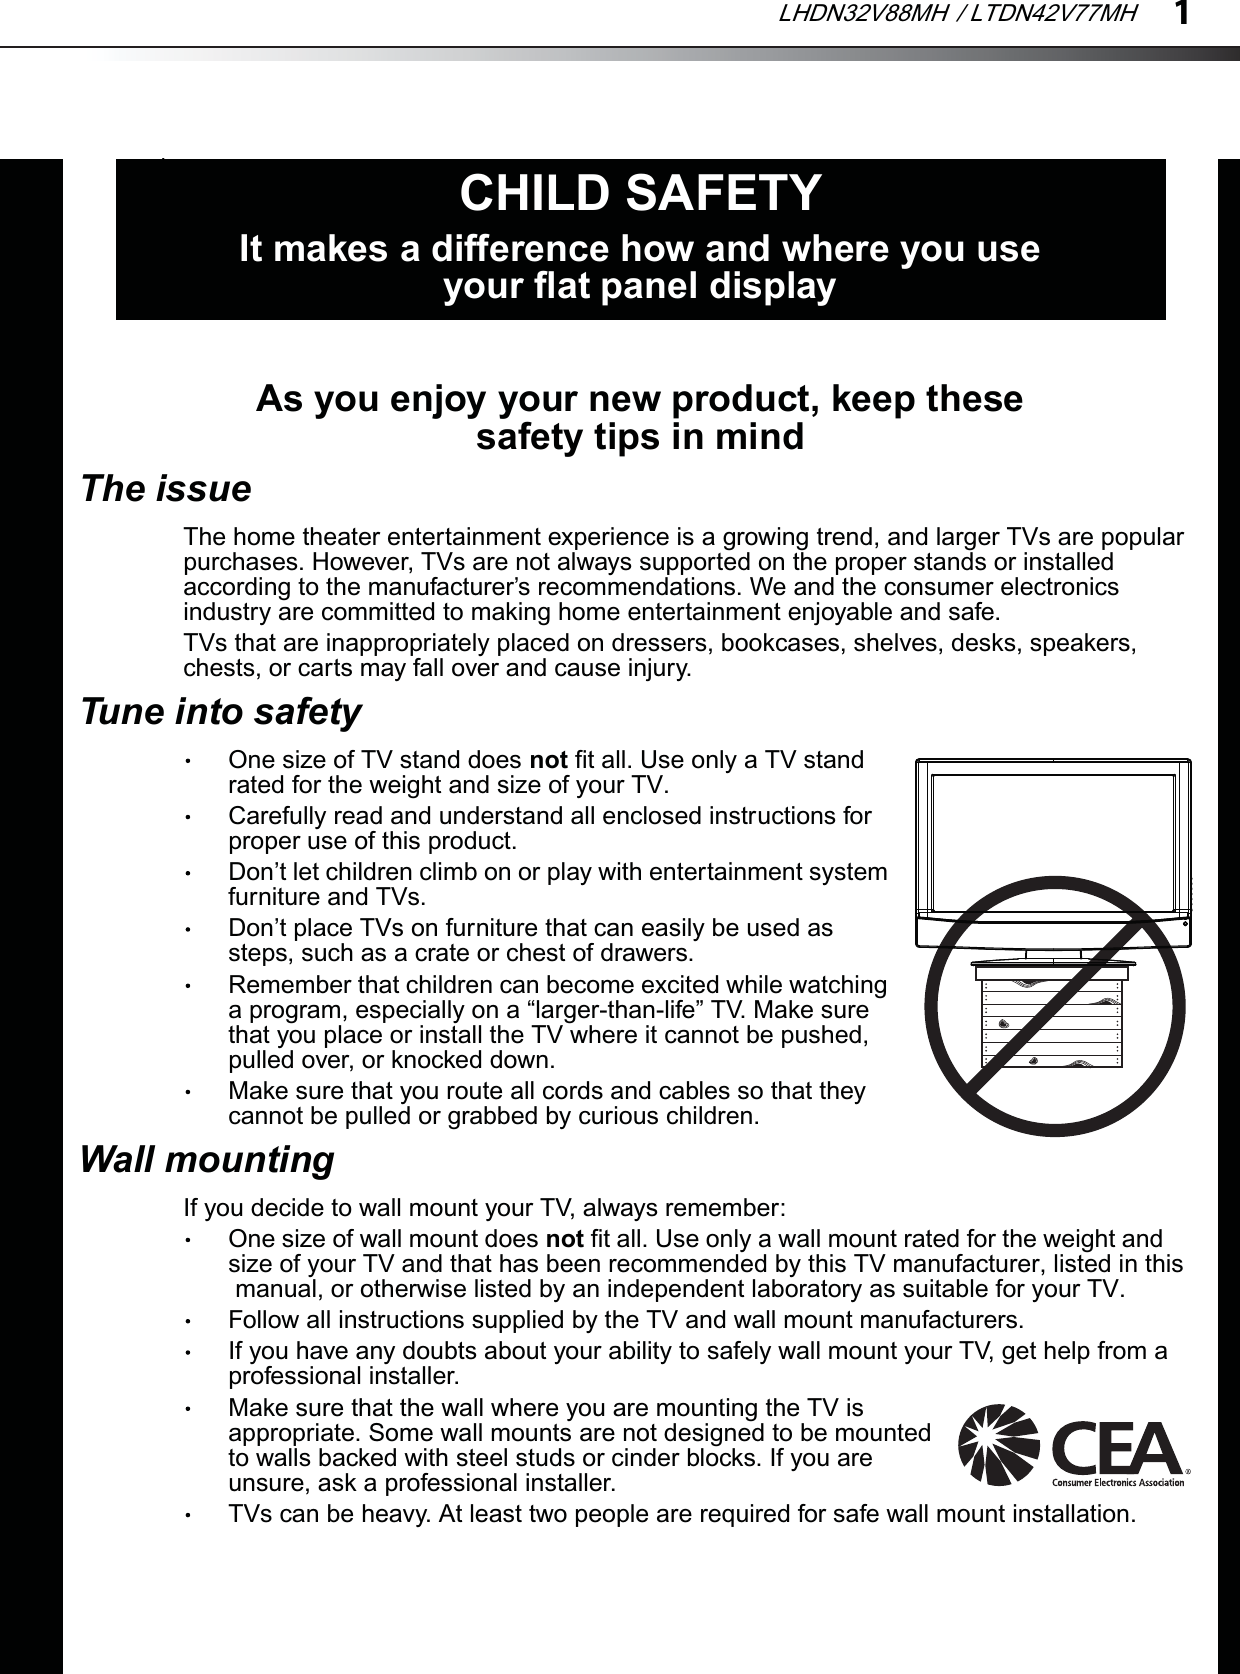 1As you enjoy your new product, keep these safety tips in mindThe issueThe home theater entertainment experience is a growing trend, and larger TVs are popular purchases. However, TVs are not always supported on the proper stands or installed according to the manufacturer’s recommendations. We and the consumer electronics industry are committed to making home entertainment enjoyable and safe.TVs that are inappropriately placed on dressers, bookcases, shelves, desks, speakers, chests, or carts may fall over and cause injury.Tune into safetyOne size of TV stand does not fit all. Use only a TV stand rated for the weight and size of your TV.Carefully read and understand all enclosed instructions for proper use of this product.Don’t let children climb on or play with entertainment system furniture and TVs.Don’t place TVs on furniture that can easily be used as steps, such as a crate or chest of drawers.Remember that children can become excited while watching a program, especially on a “larger-than-life” TV. Make sure that you place or install the TV where it cannot be pushed, pulled over, or knocked down.Make sure that you route all cords and cables so that they cannot be pulled or grabbed by curious children.Wall mountingIf you decide to wall mount your TV, always remember:One size of wall mount does not fit all. Use only a wall mount rated for the weight andsize of your TV and that has been recommended by this TV manufacturer, listed in this manual, or otherwise listed by an independent laboratory as suitable for your TV.Follow all instructions supplied by the TV and wall mount manufacturers.If you have any doubts about your ability to safely wall mount your TV, get help from a professional installer.Make sure that the wall where you are mounting the TV is appropriate. Some wall mounts are not designed to be mounted to walls backed with steel studs or cinder blocks. If you are unsure, ask a professional installer.TVs can be heavy. At least two people are required for safe wall mount installation.fCHILD SAFETYIt makes a difference how and where you use your flat panel displayLHDN32V88MH / LTDN42V77MH